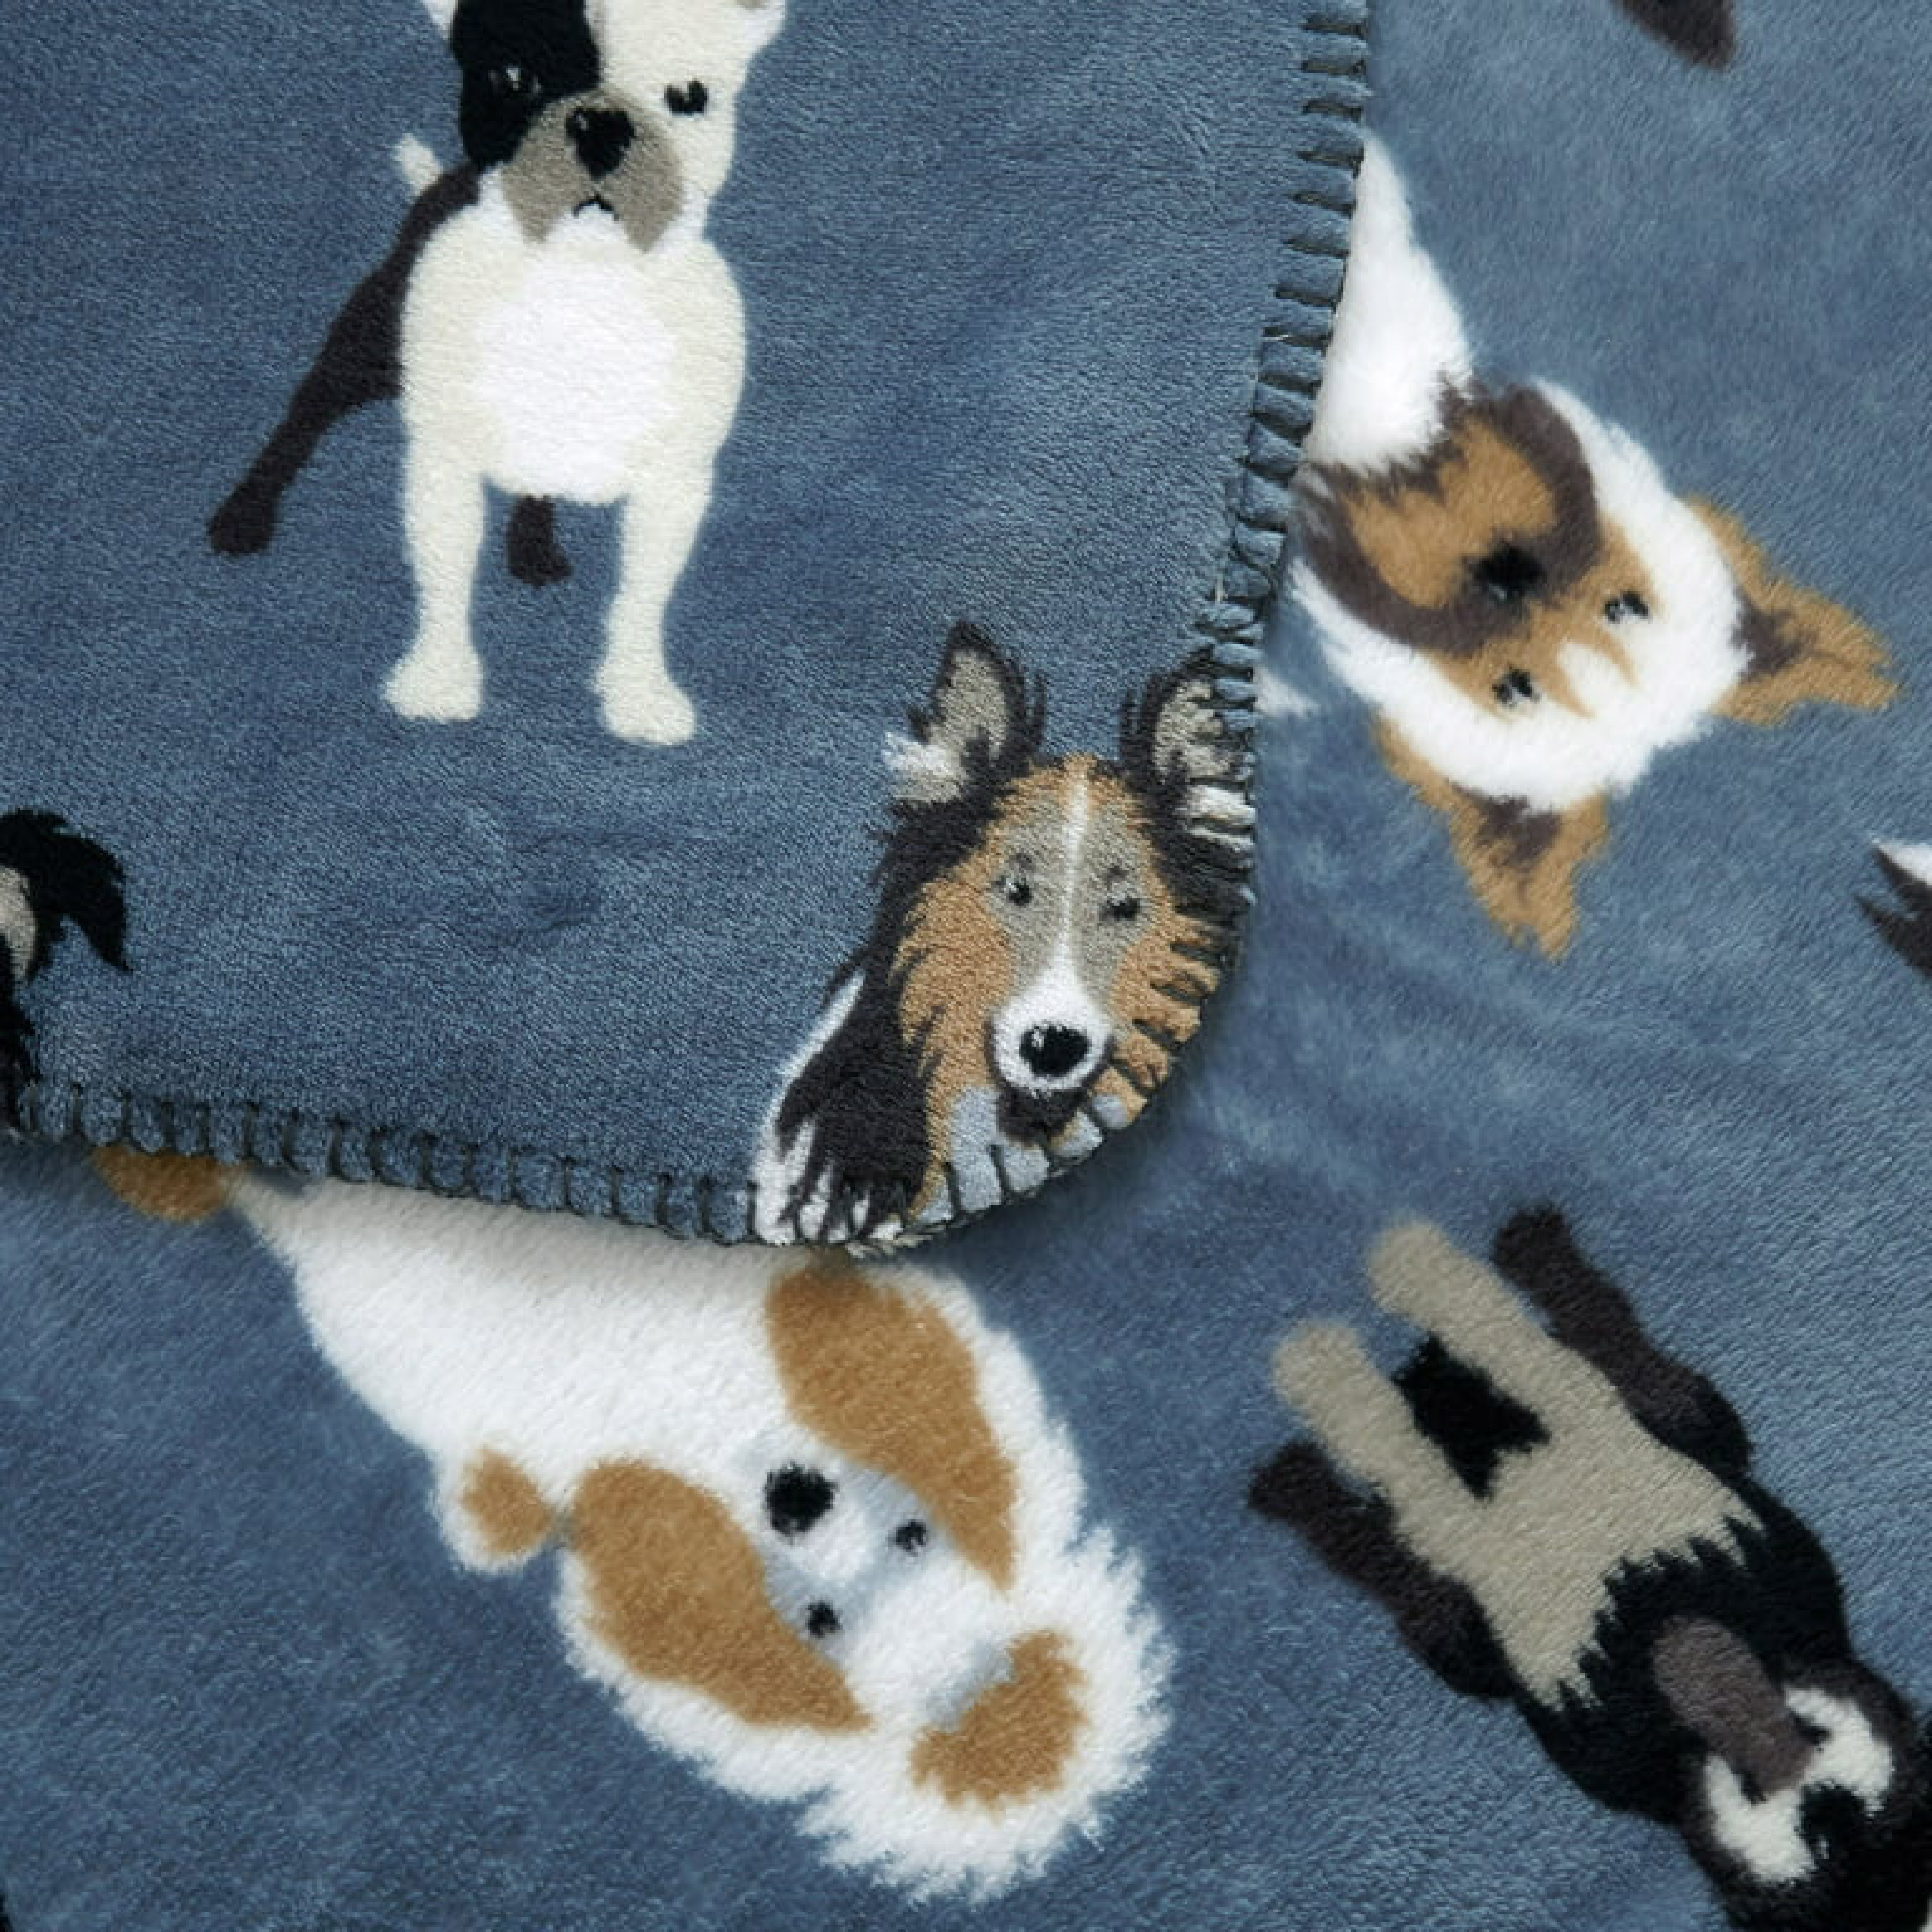 Mainstays Blue Dogs Plush Throw Blanket 50" x 60" - image 4 of 6